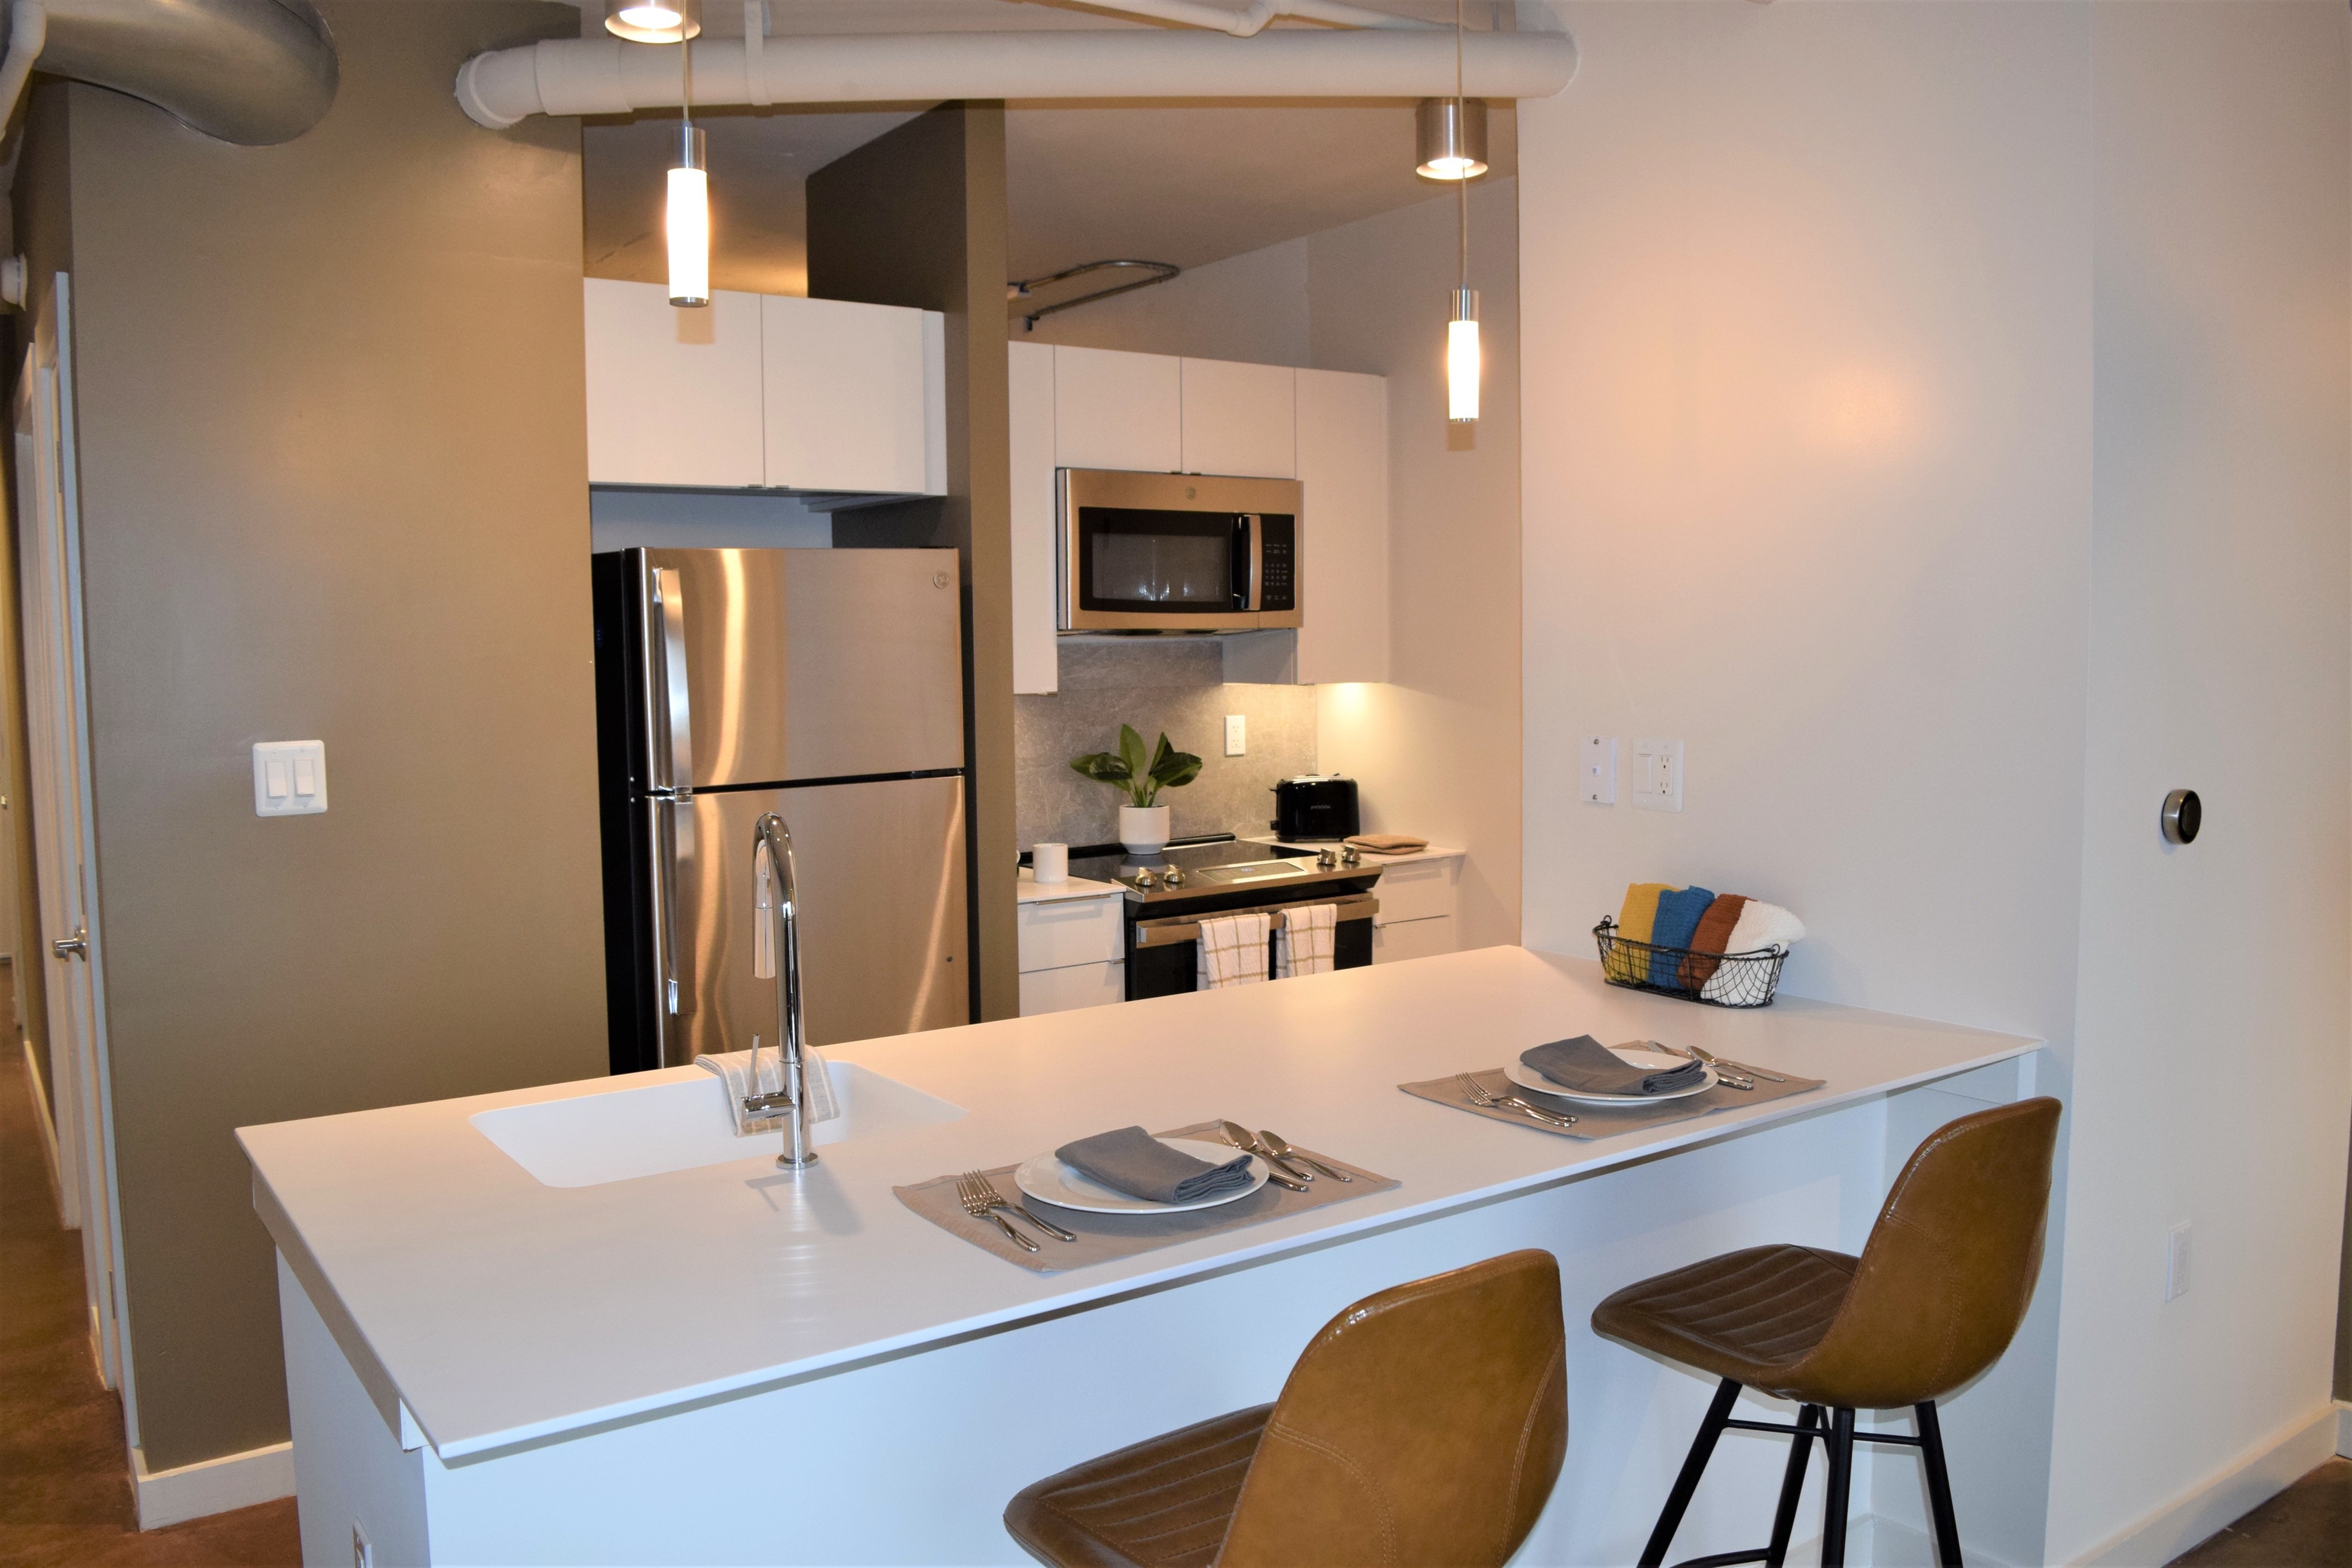 Image of Newly Renovated Apartment |  Park Triangle Apartments | Columbia Heights Apartments | Washington DC Apartments